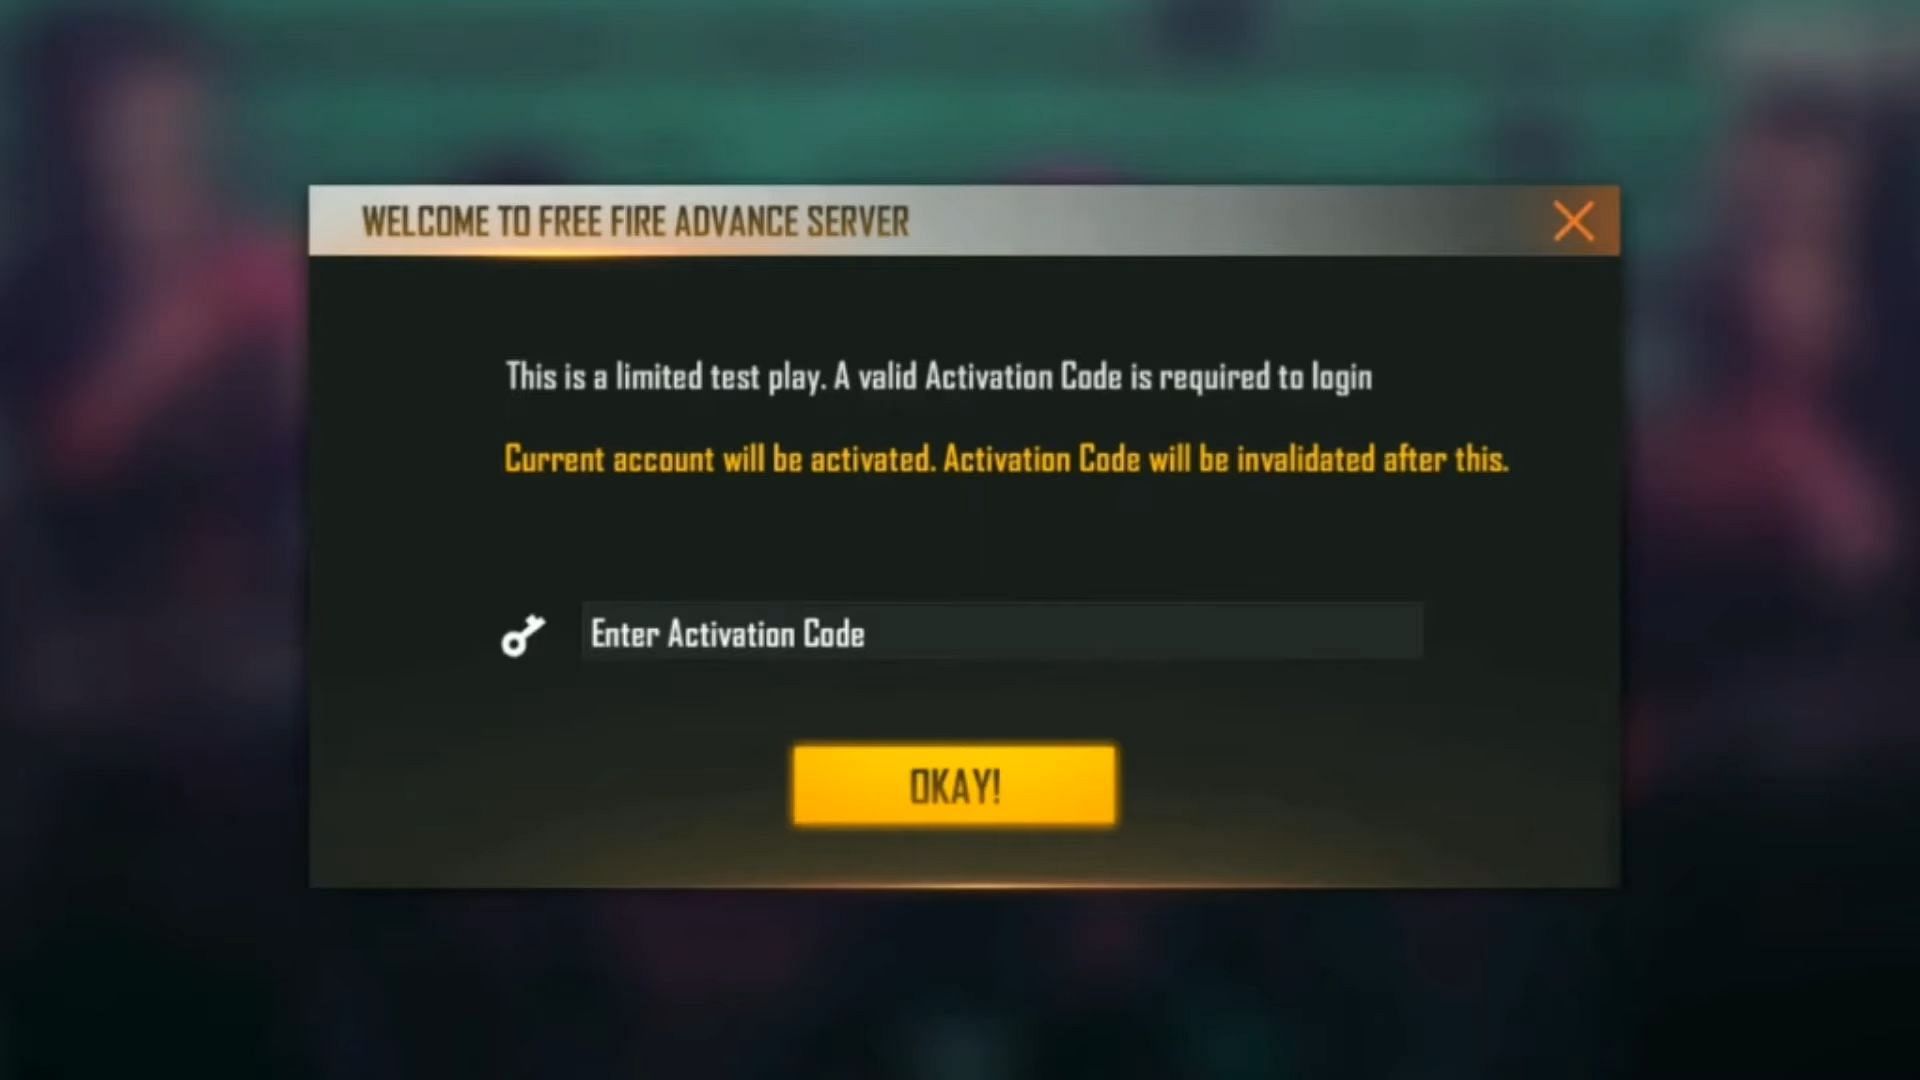 Activation code is mandatory (Image via Free Fire)